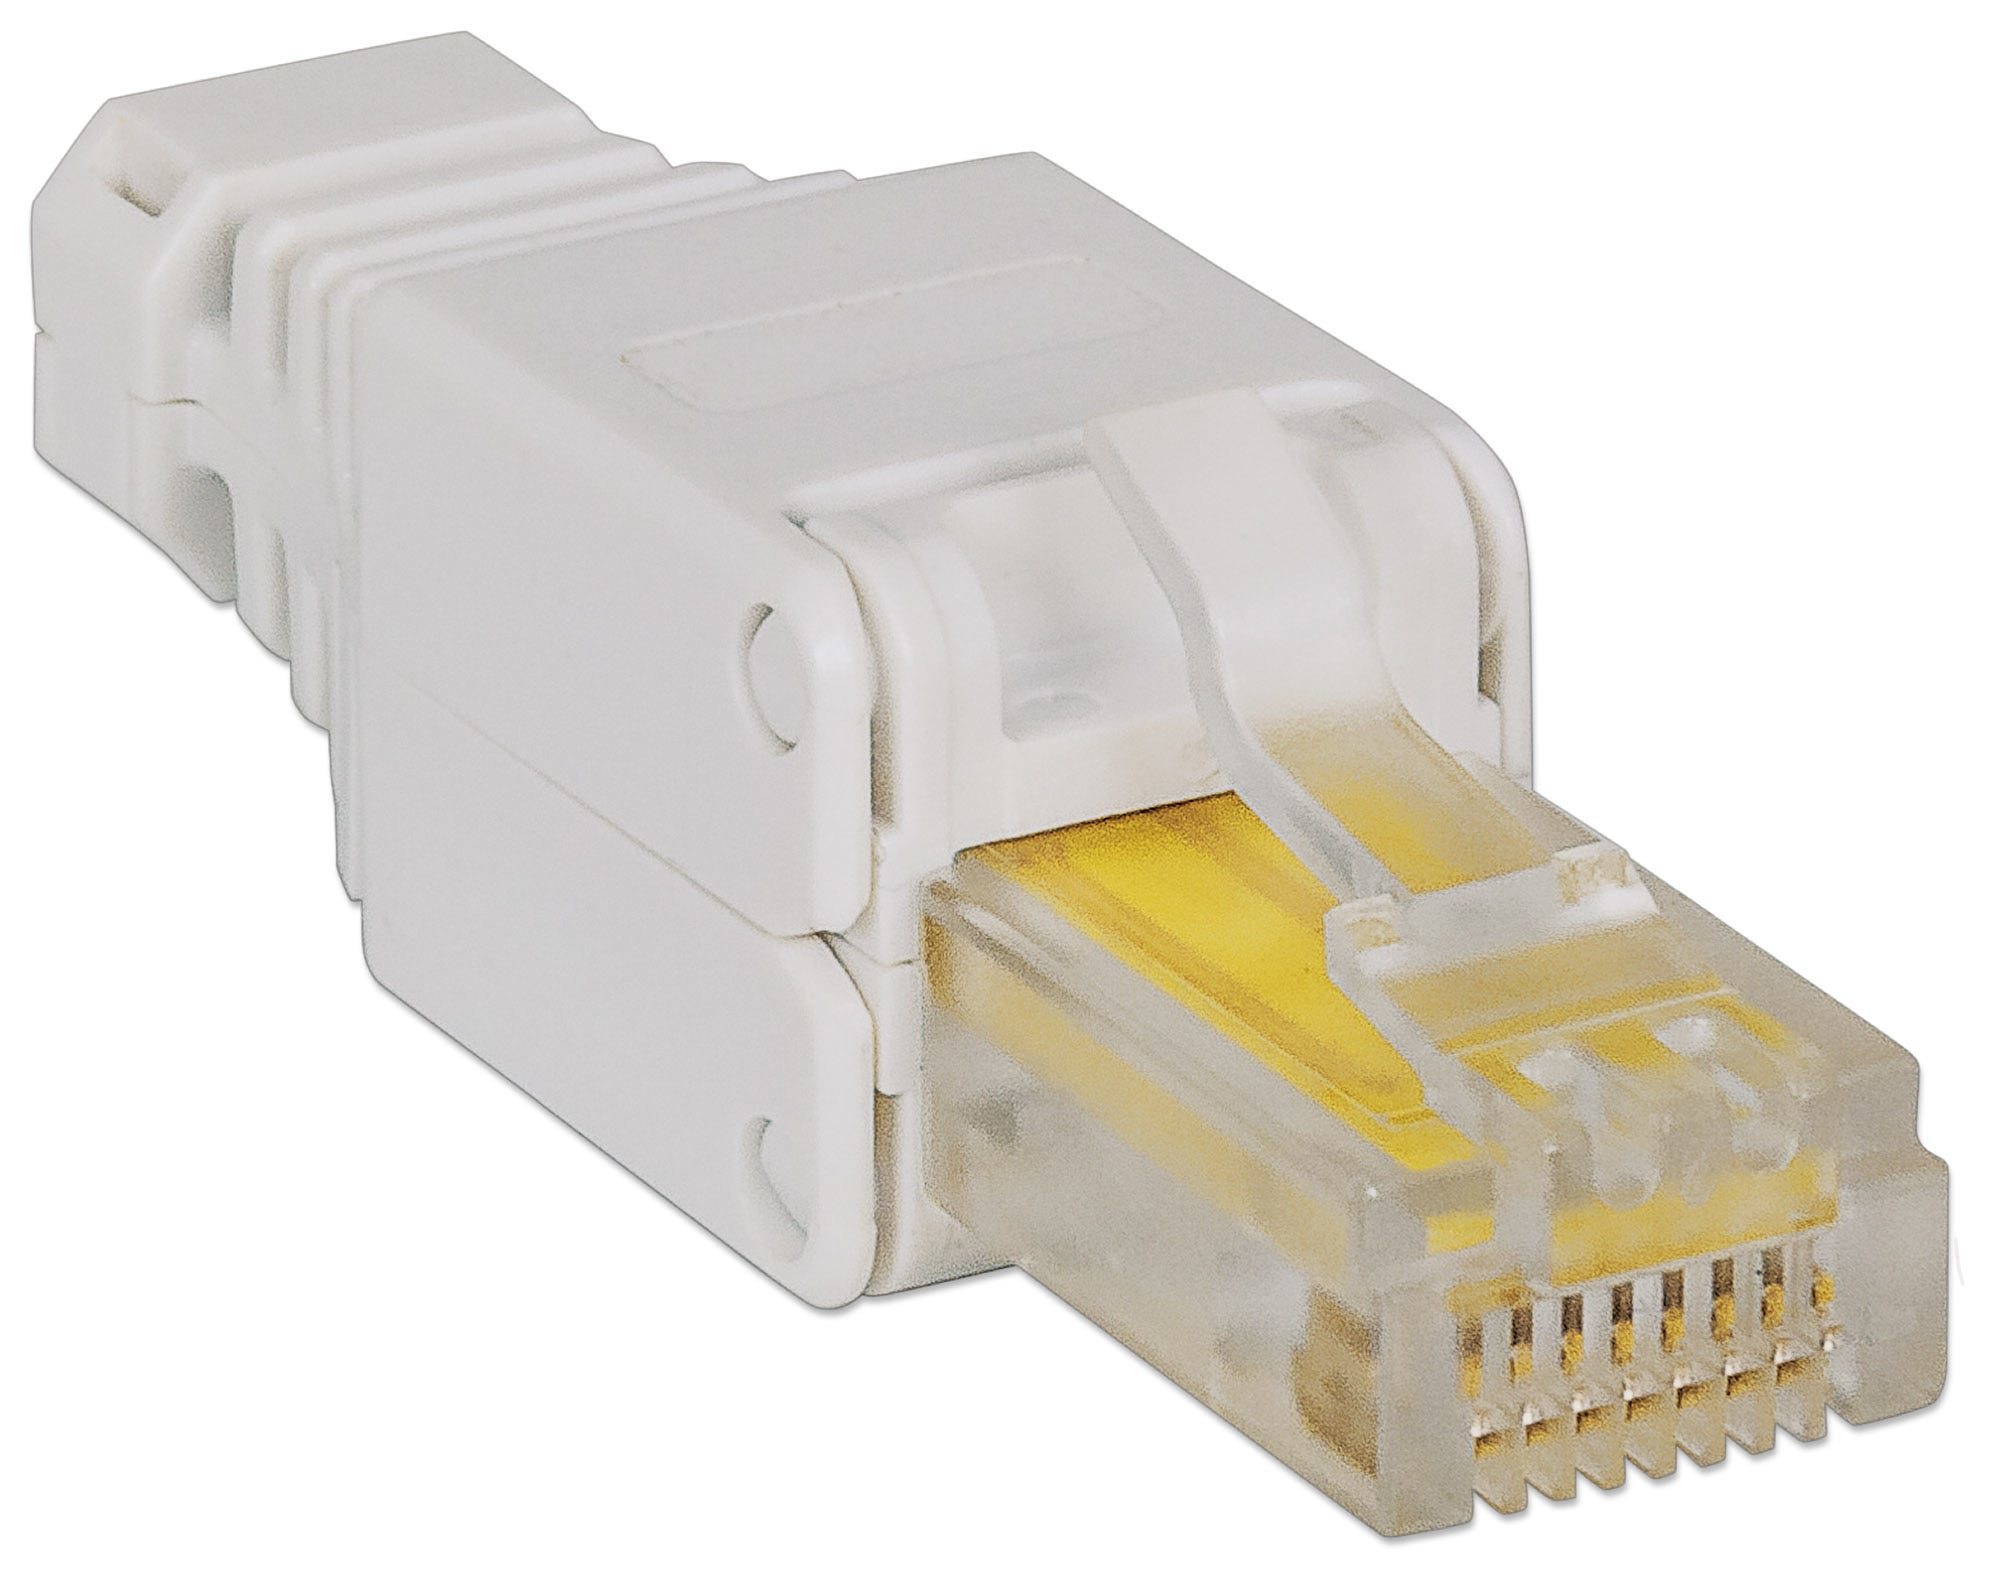 Intellinet RJ45 Modular Plug, Toolless Connector, Cat5/5e/6, 22-26 AWG solid and stranded UTP cables